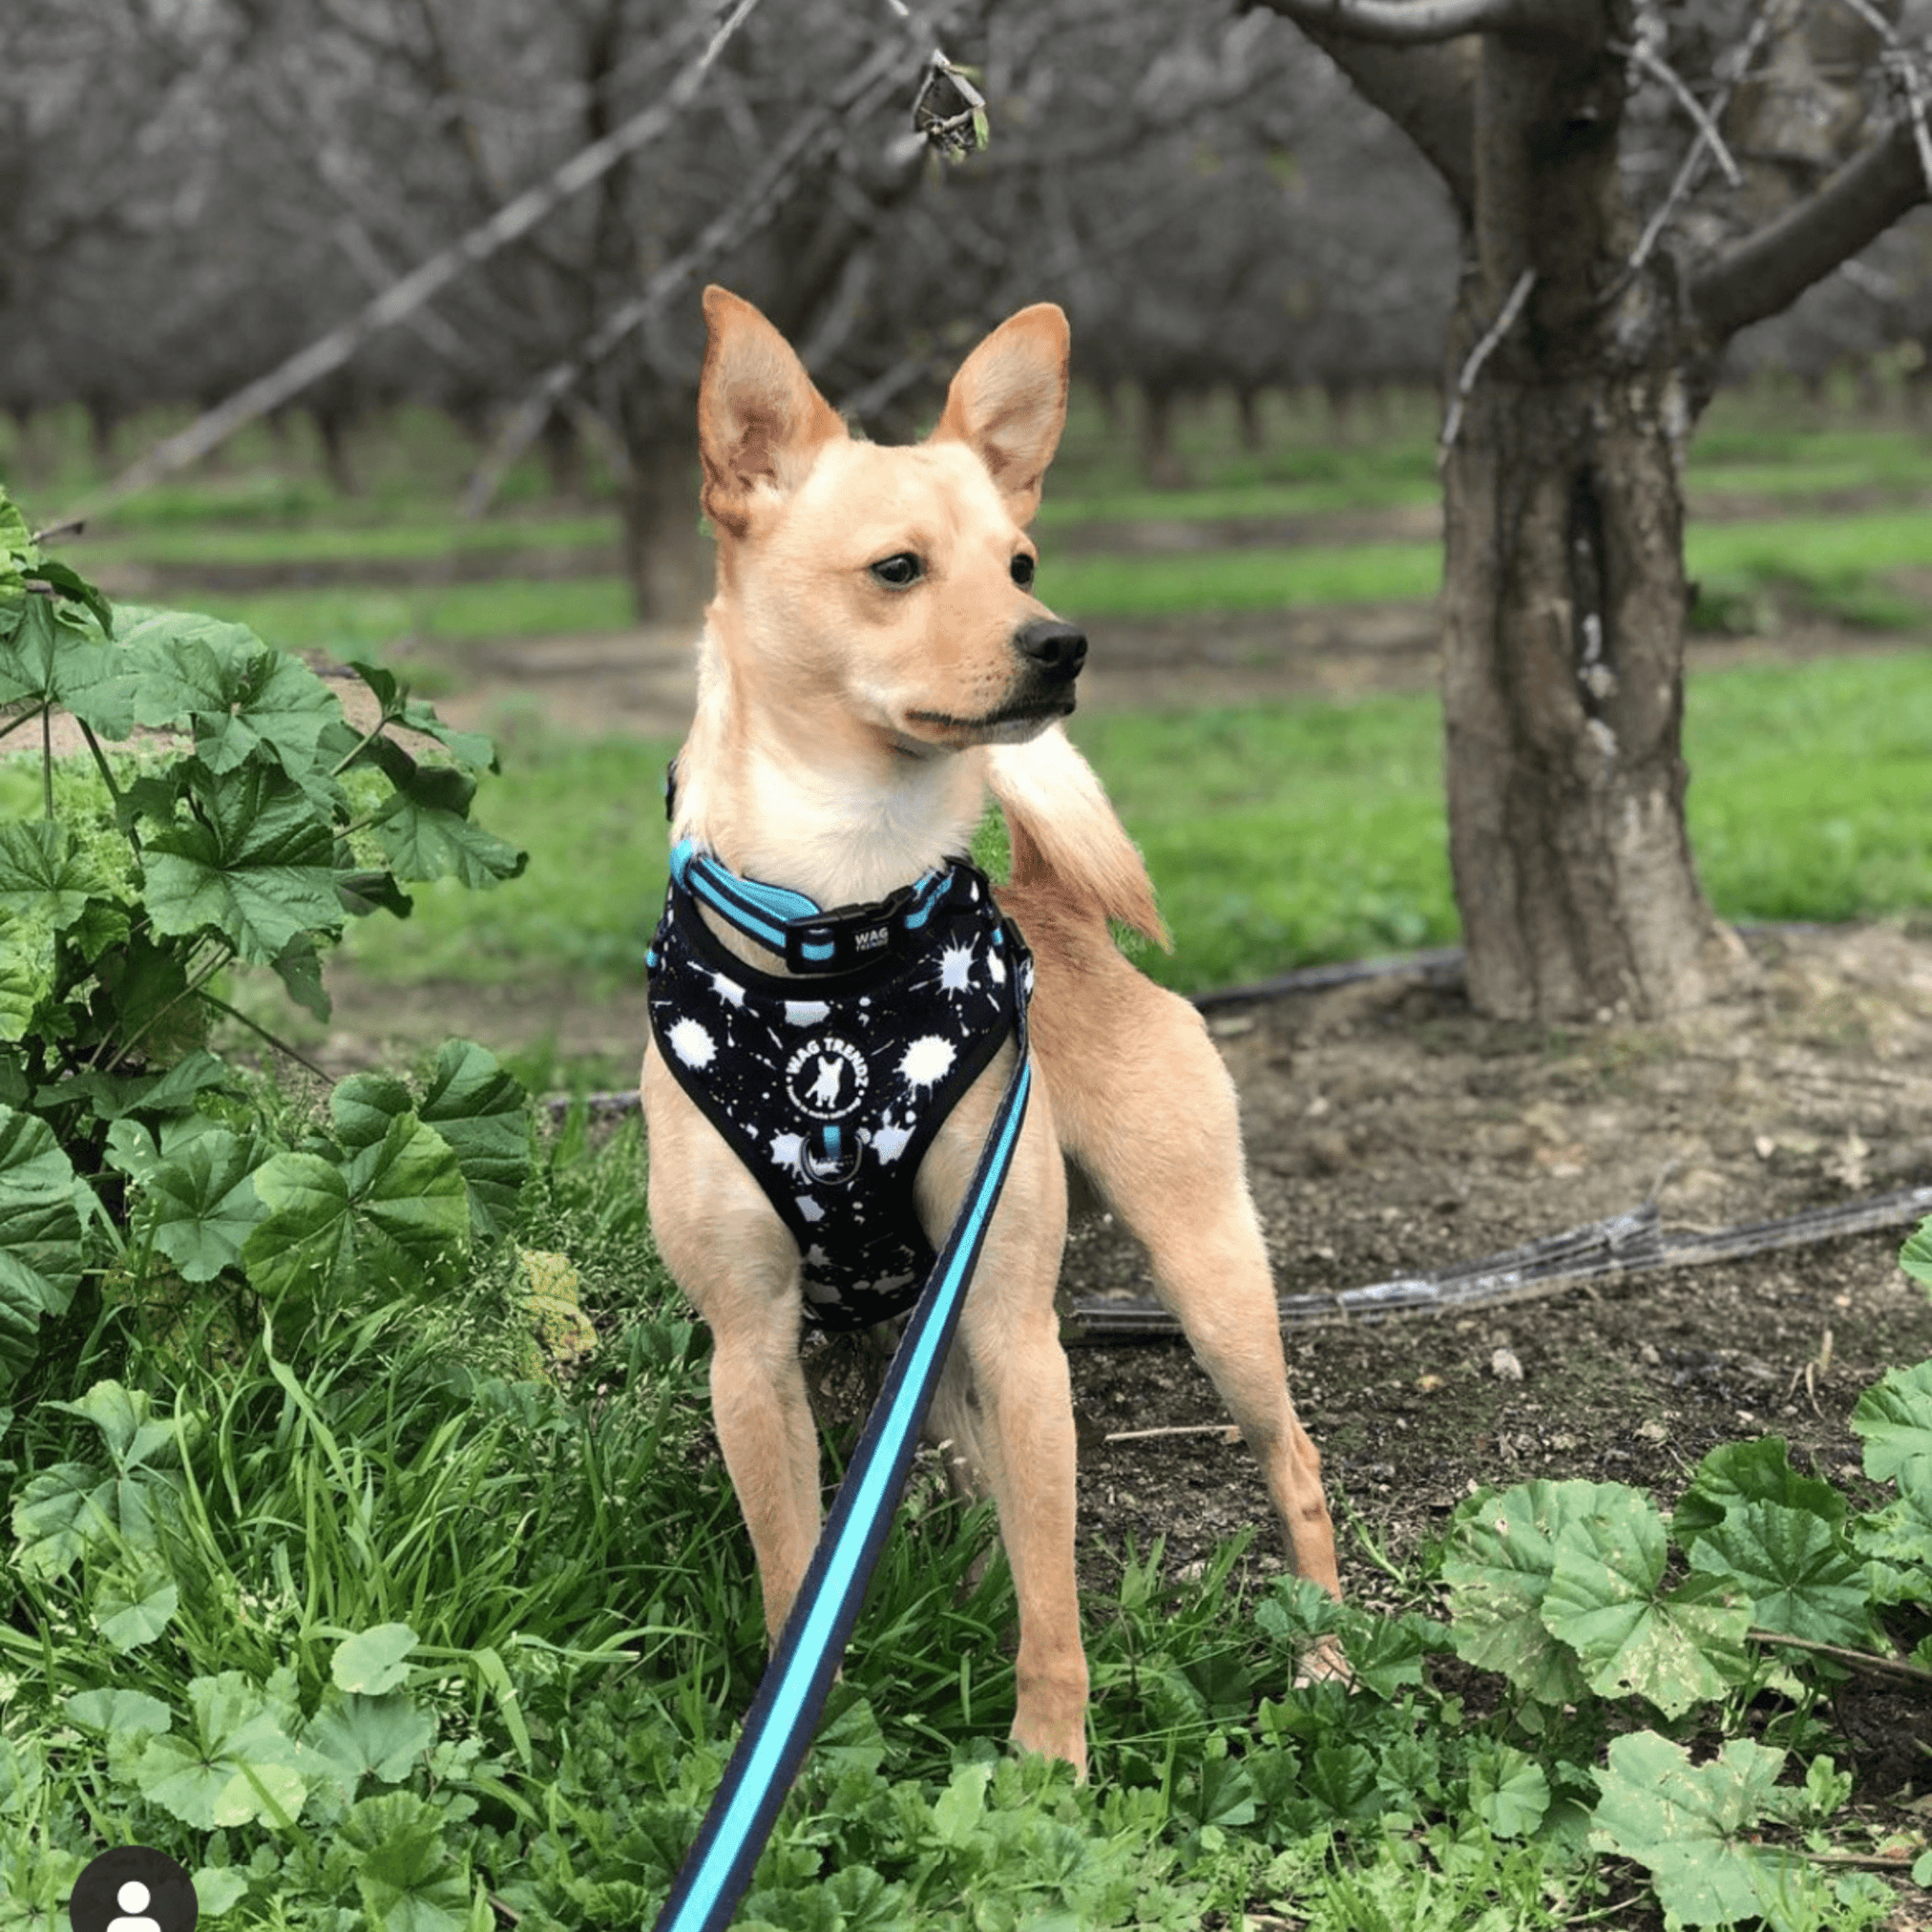 Chihuahua wearing black and white splatter adjustable dog harness with matching teal dog collar and leash  standing outside in a field with a tree in the background - Wag Trendz